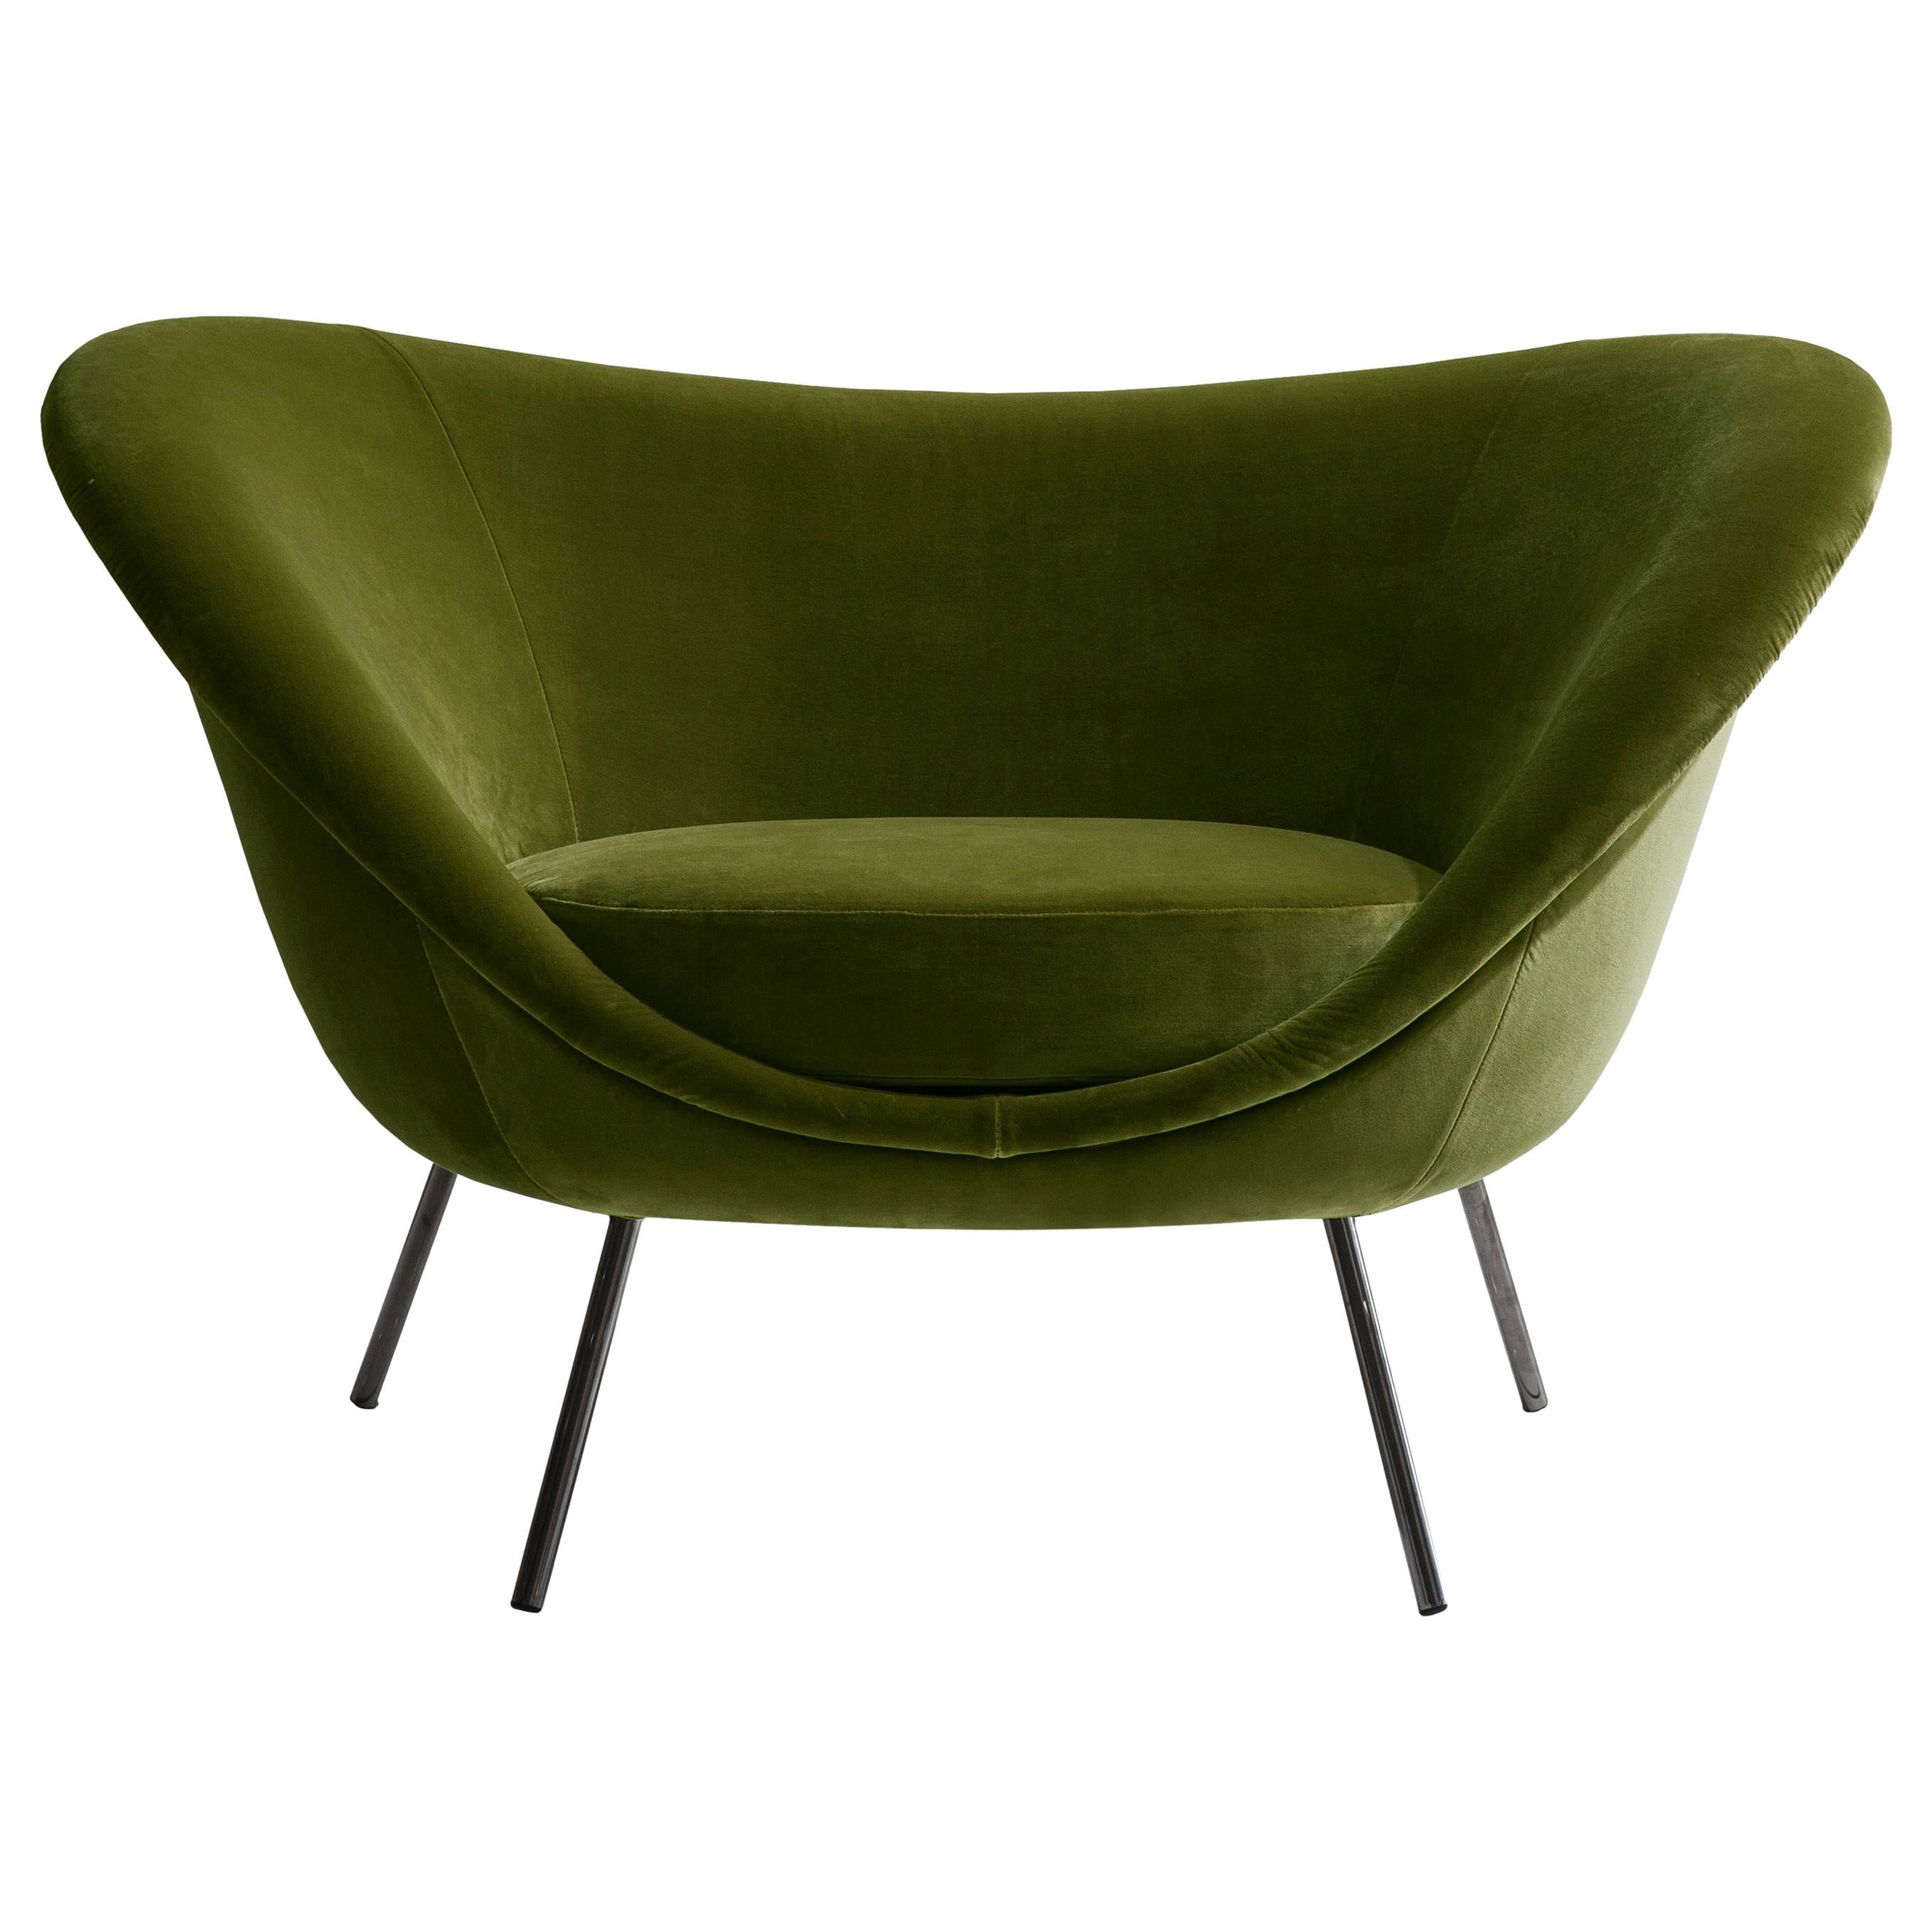 Armchair in Velvet Molteni&C by Gio Ponti D.154.2 - made in Italy